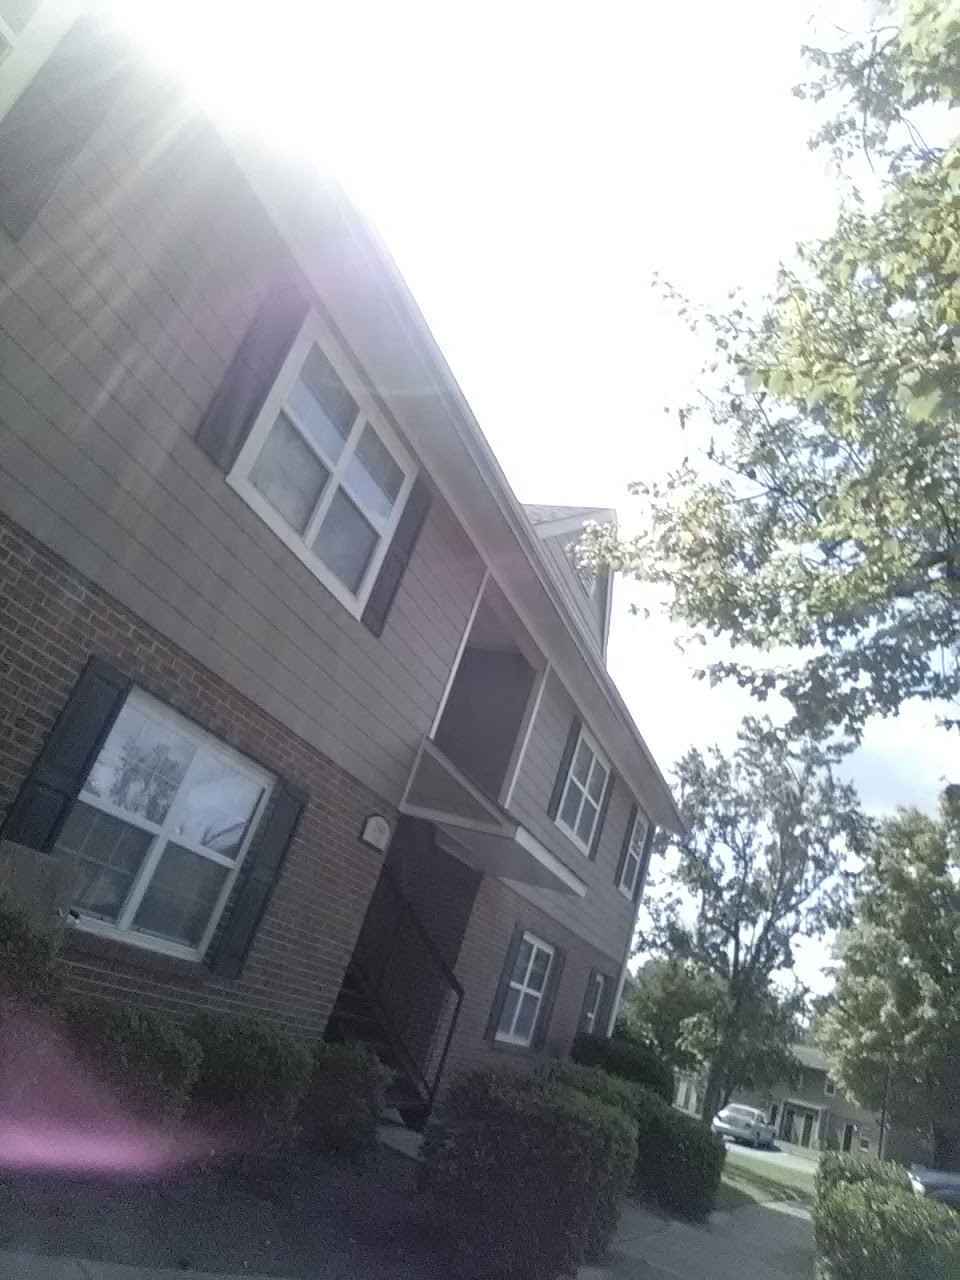 Photo of FAYETTEVILLE GARDENS APARTMENTS. Affordable housing located at 2941 A GORDON WAY FAYETTEVILLE, NC 28303